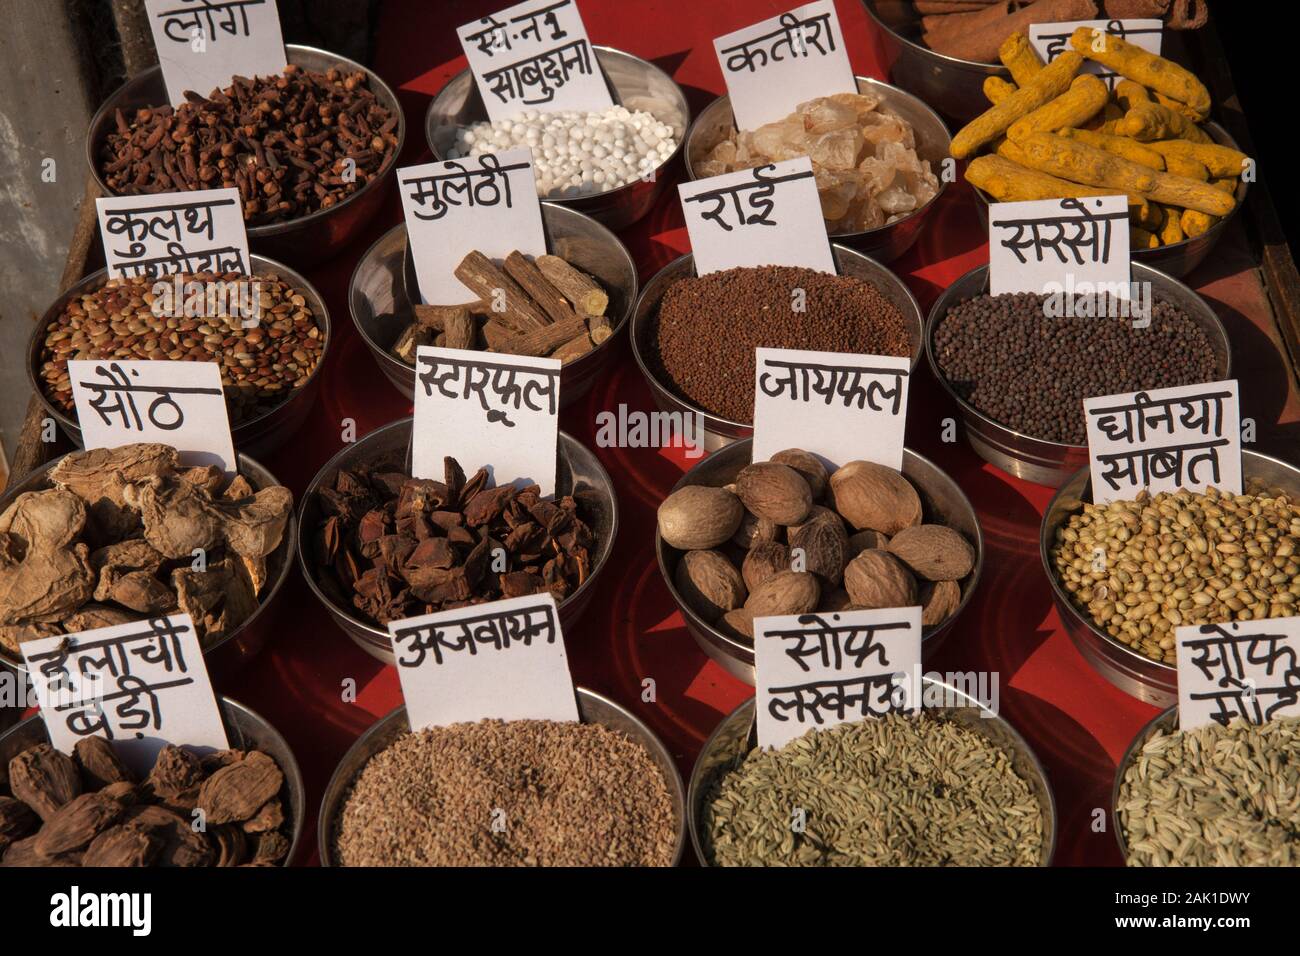 Display of spices in the Chandni Chowk market in the old city of Delhi Stock Photo